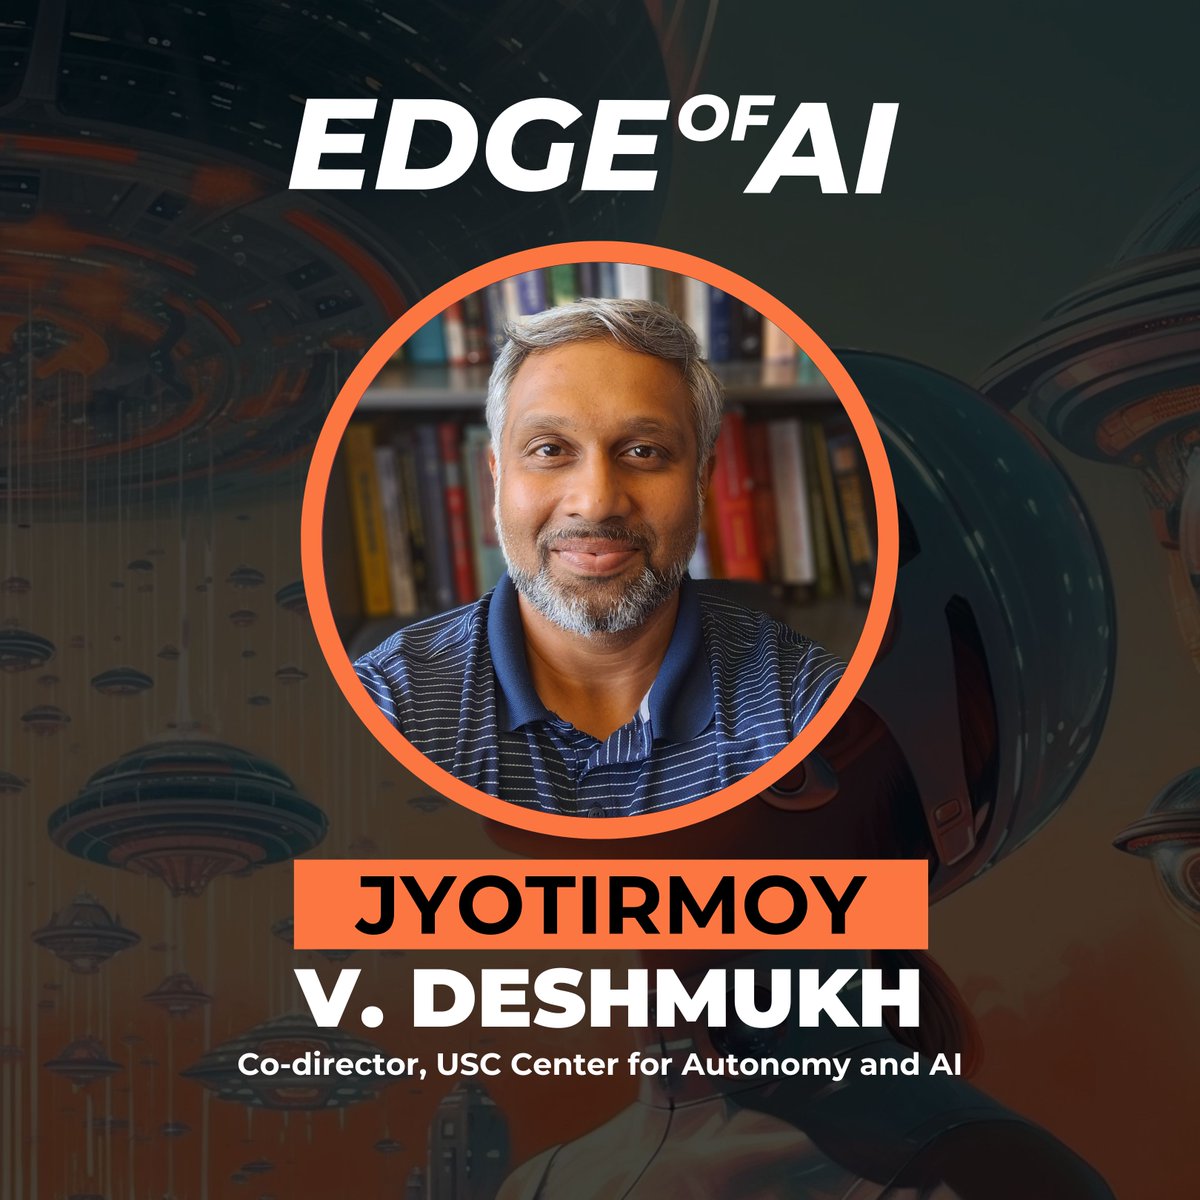 🎙️ Join us at the #EdgeOfAI Launch Party tomorrow for an insightful #LivePodcast with Jyo Deshmukh about the Intersection of AI Progress, Autonomy, & Public Safety 🤖 
👉 #GetYourTicketsNow! lu.ma/edgeofai 
#AIInnovation #FutureTech #PublicSafety #AIExperts